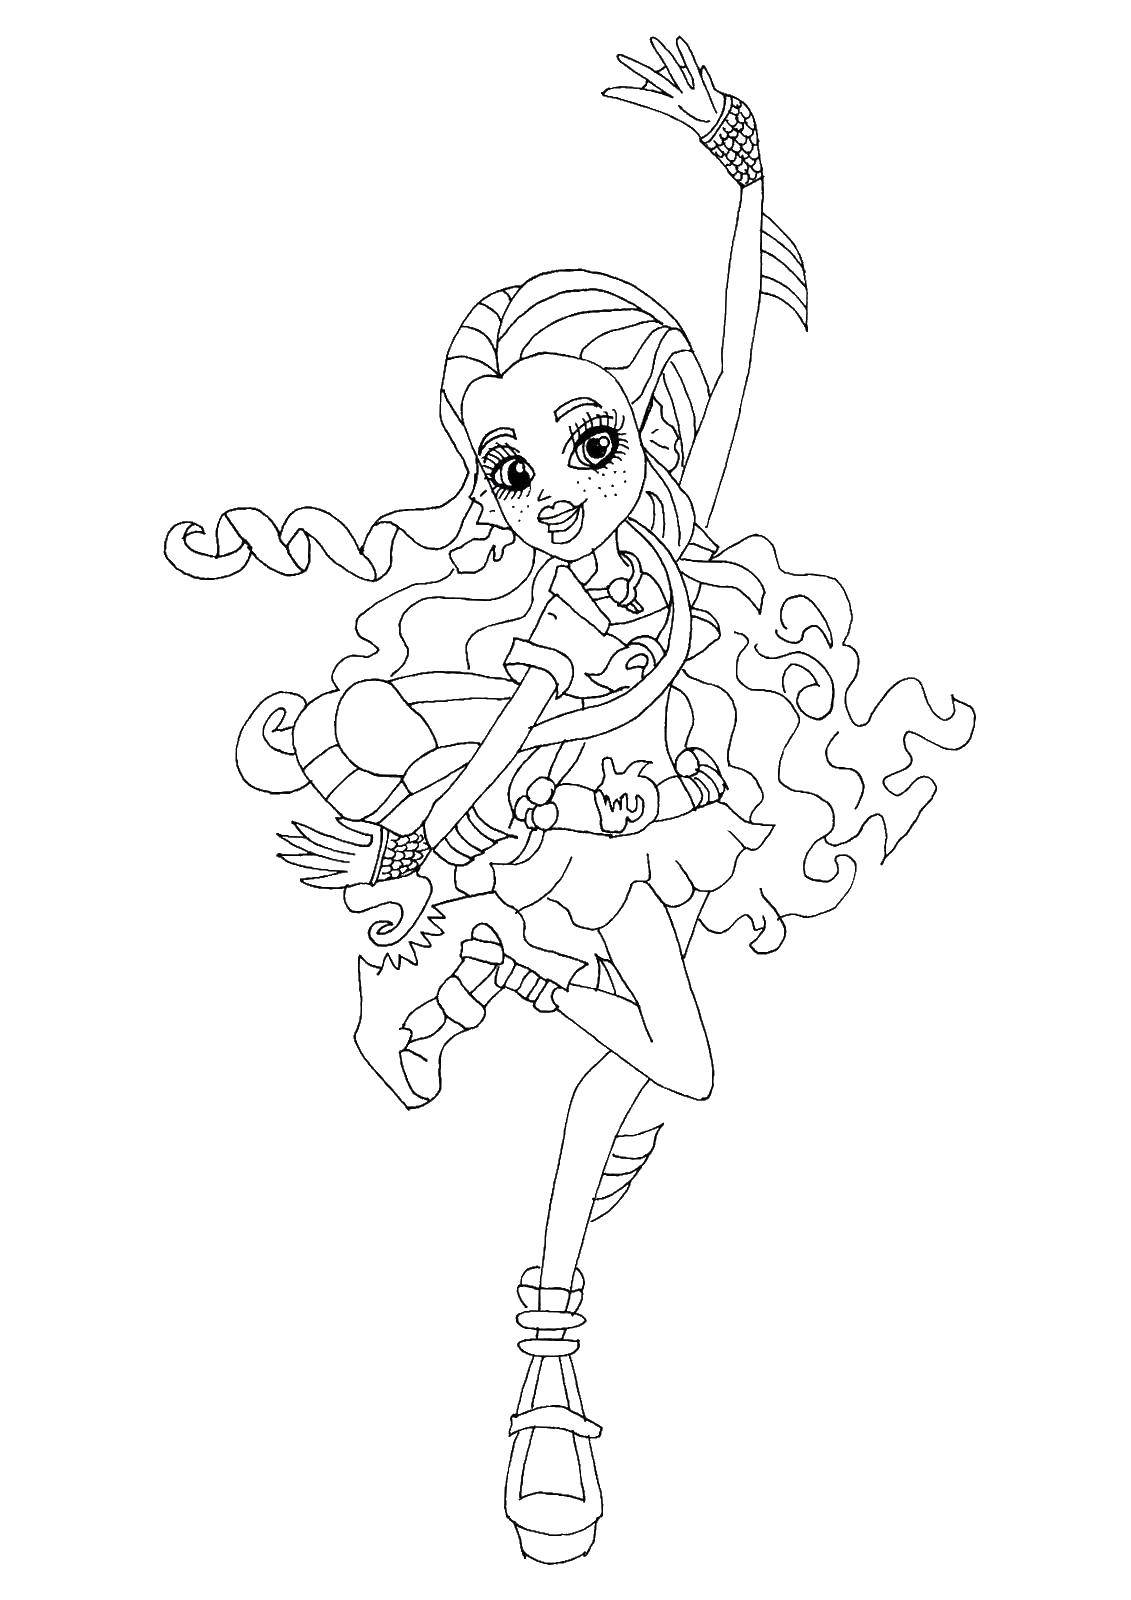 Coloring Funny monster. Category school of monsters. Tags:  Monster High.